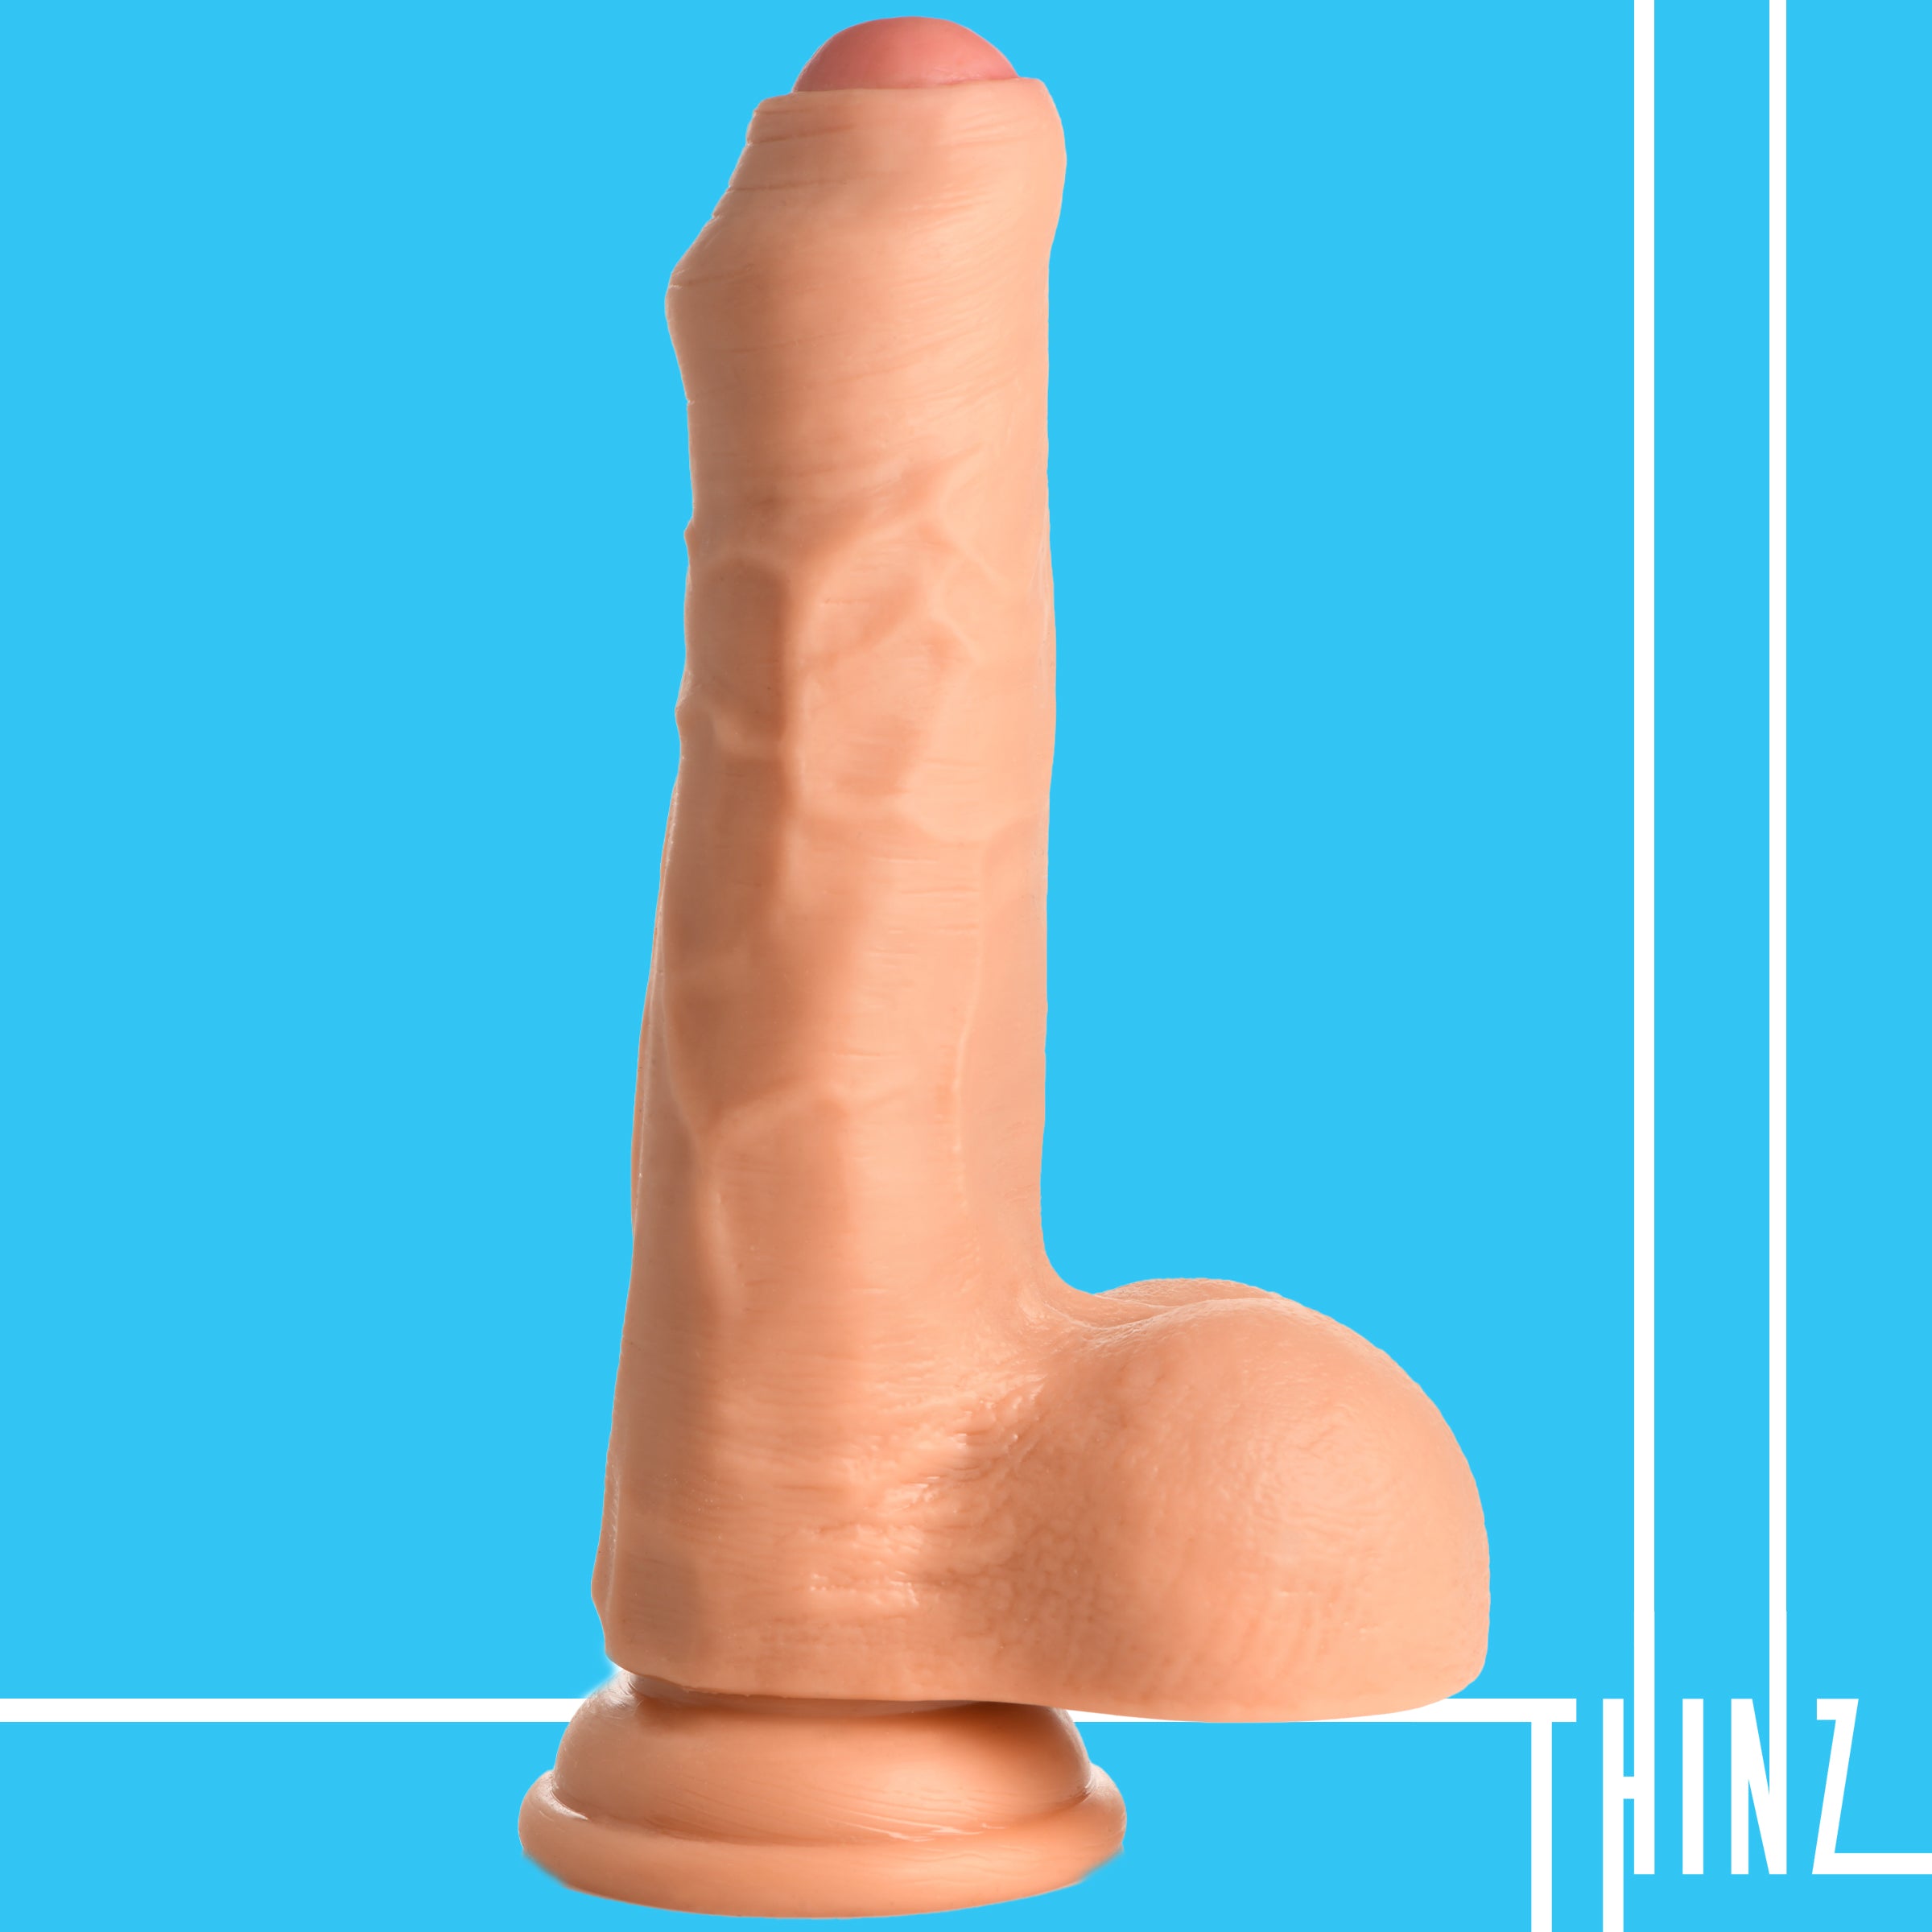 8 Inch uncut Dildo with Balls